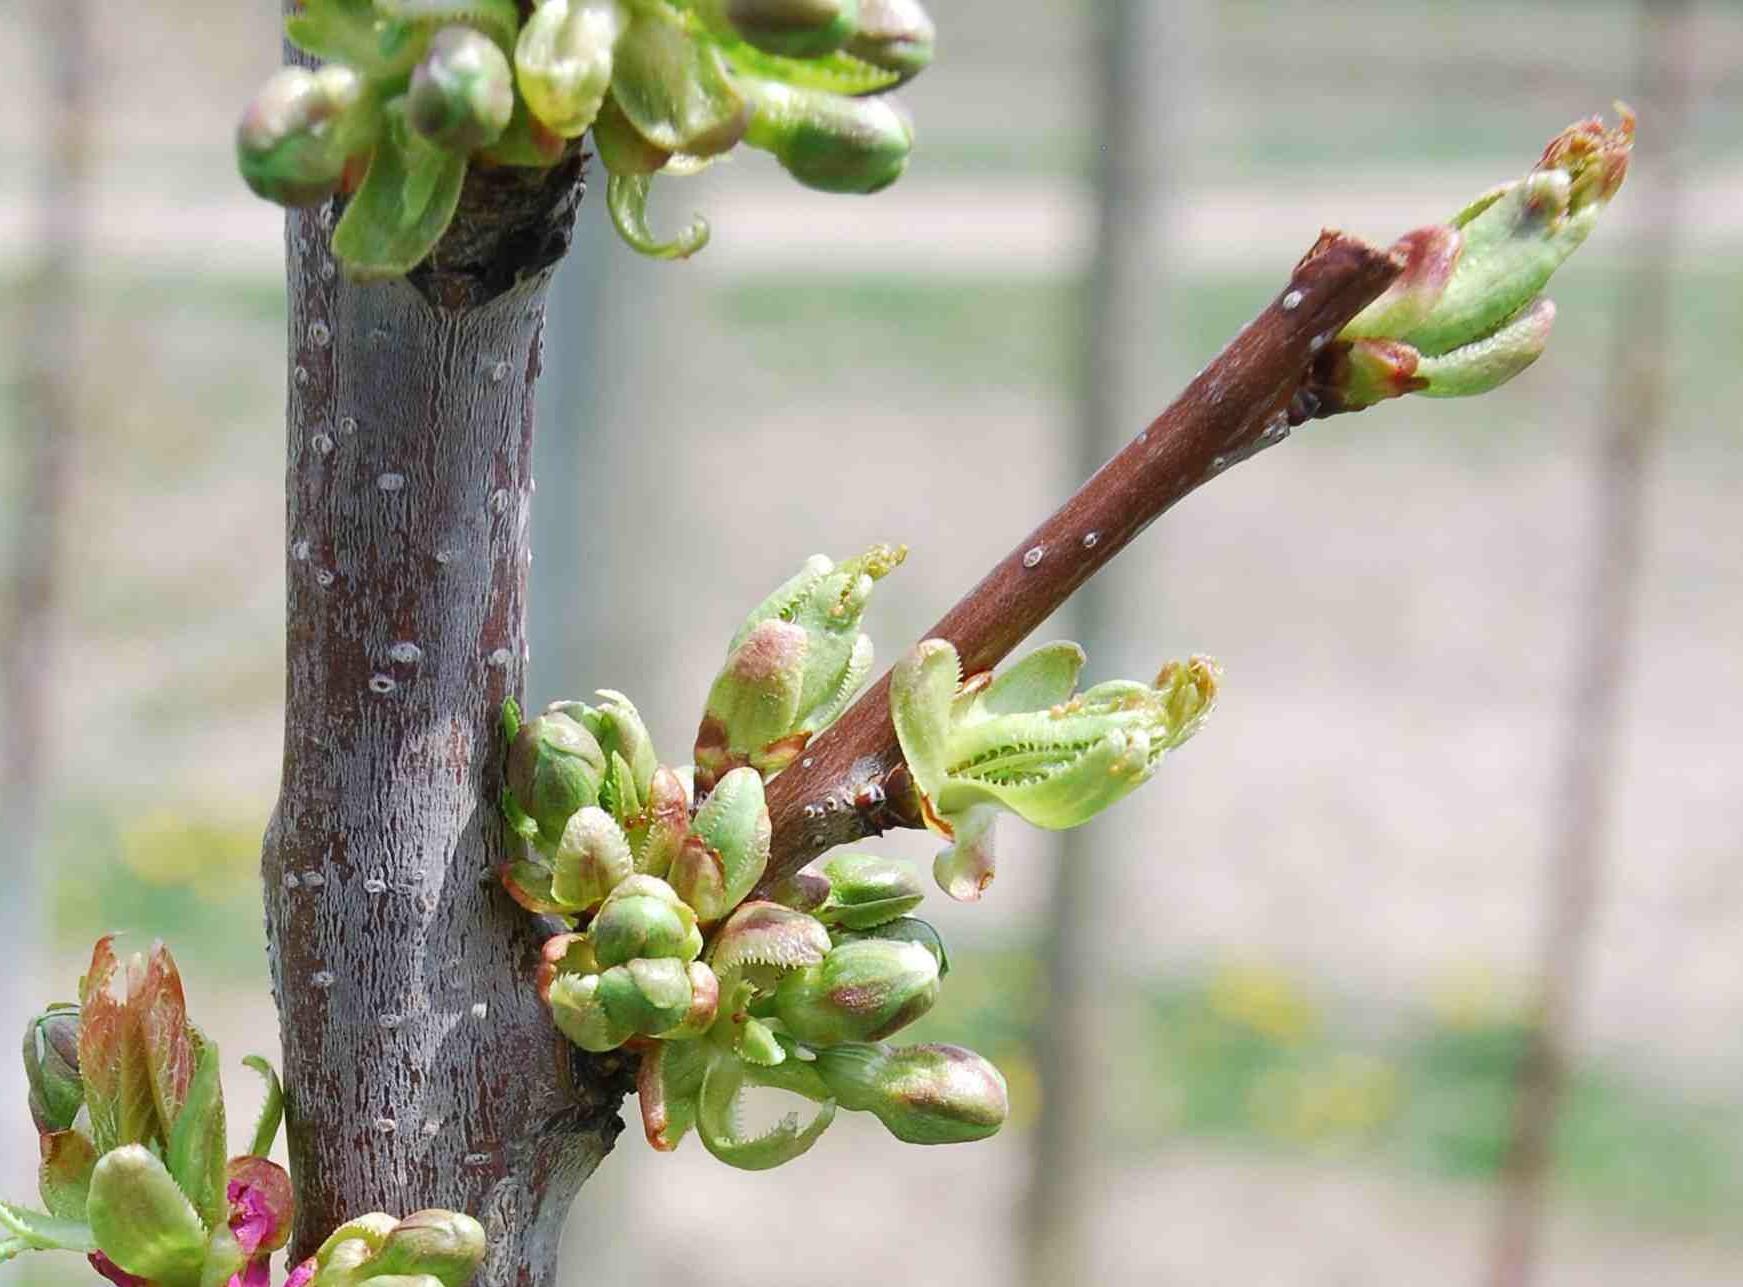 A close-up of buds at the base of a cherry tree branch.